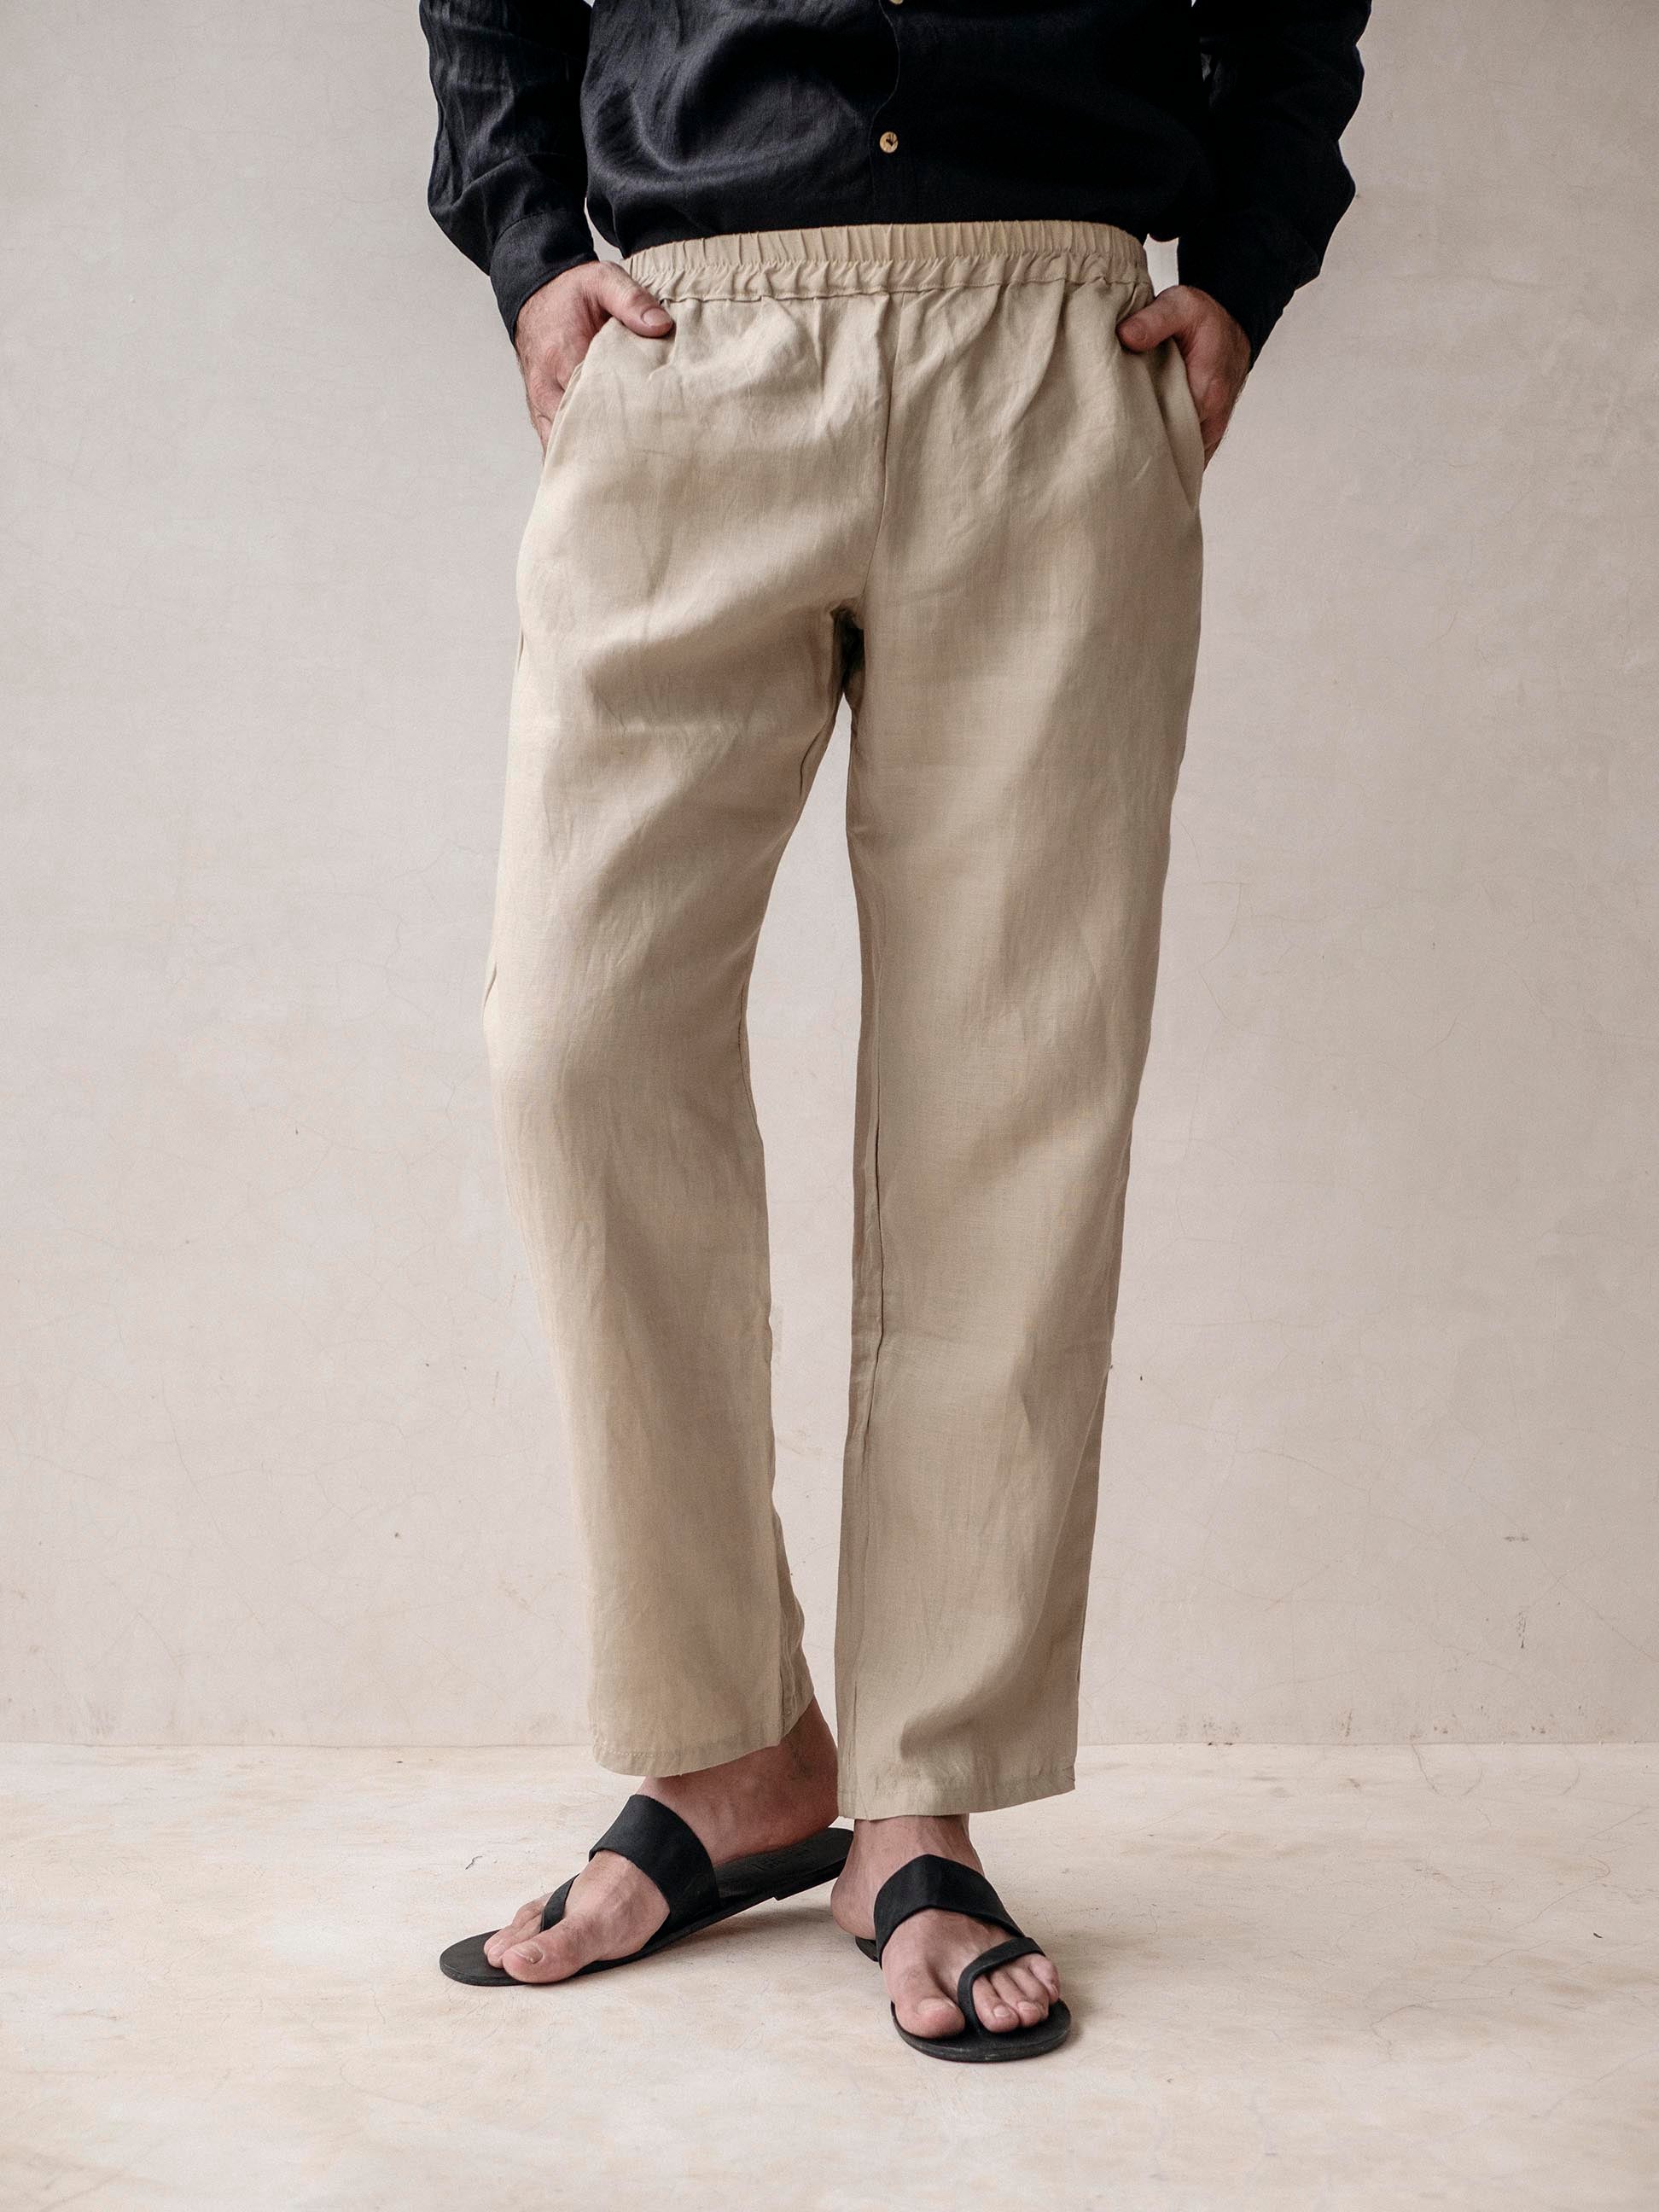 Men's Linen Pants, Linen trousers, joggers and shorts︱ - In the